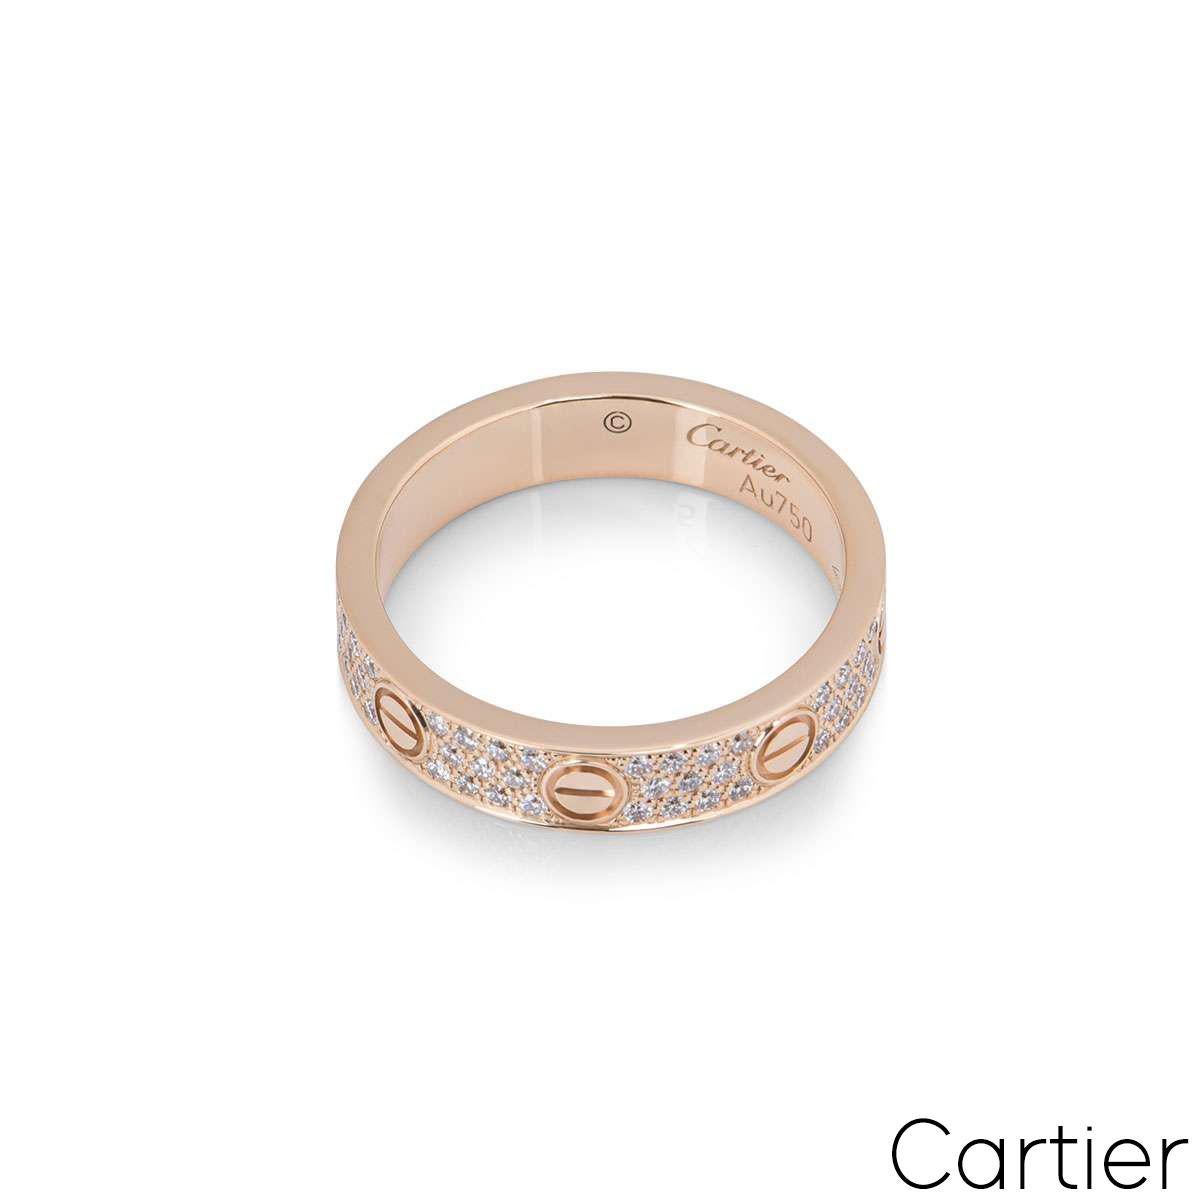 cartier 49 ring size